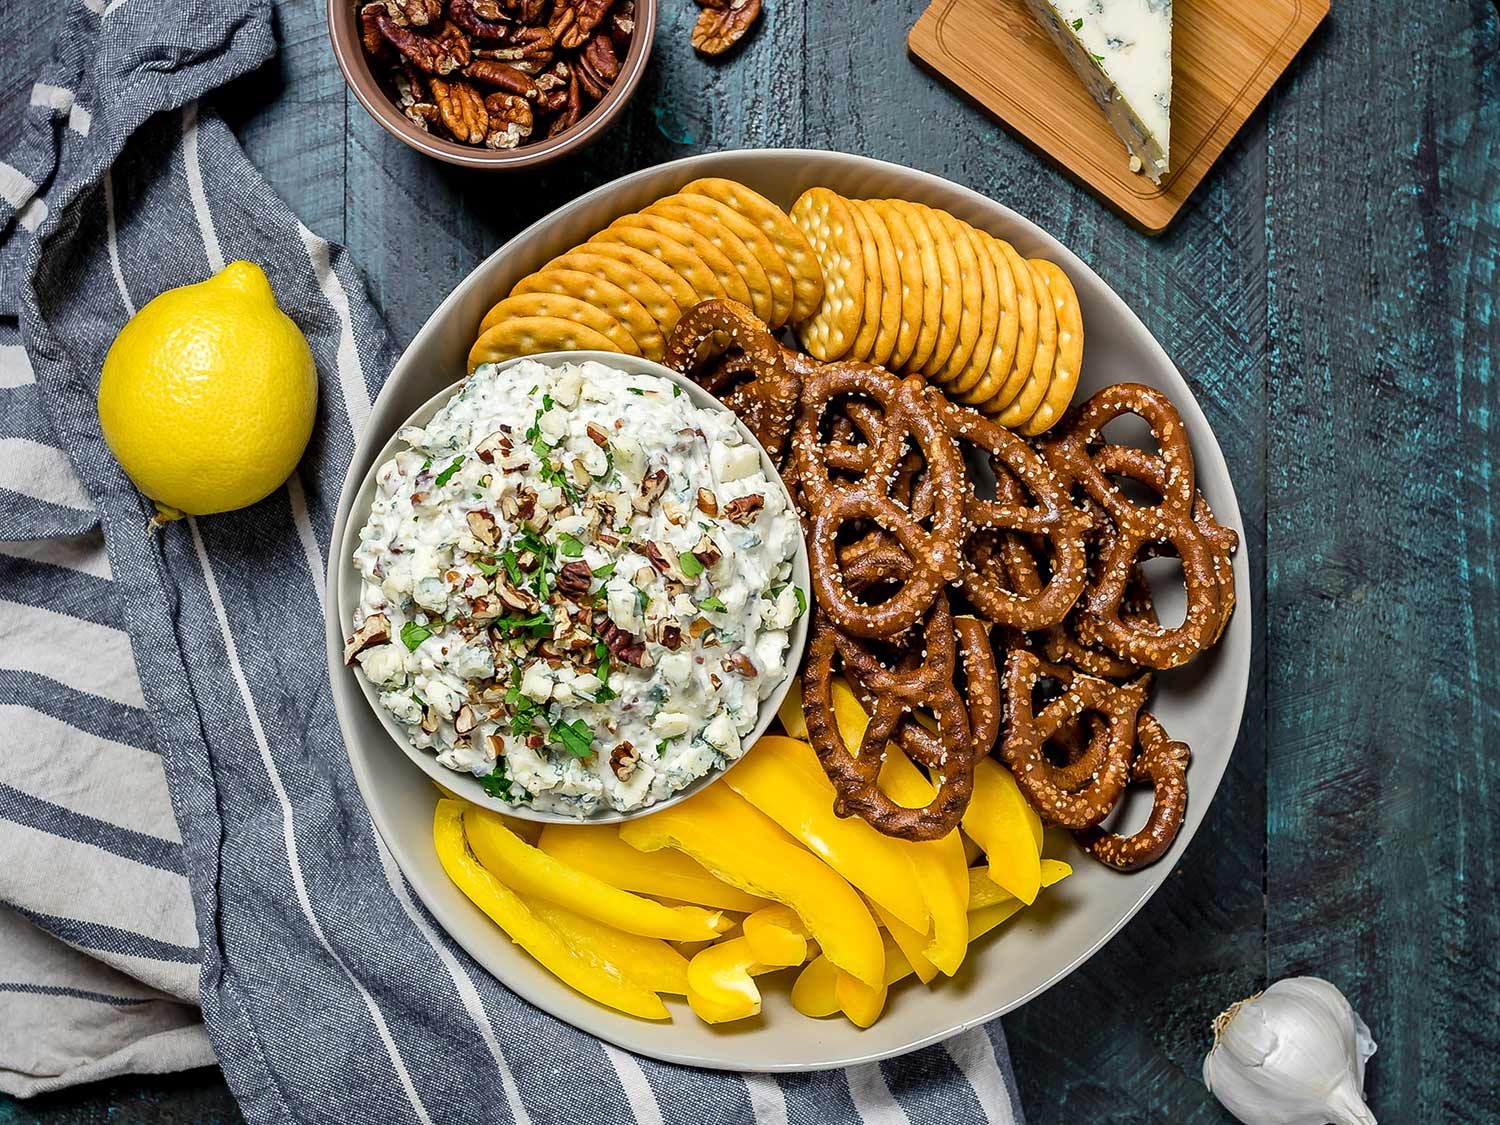 Blue Cheese and Toasted-Pecan Dip